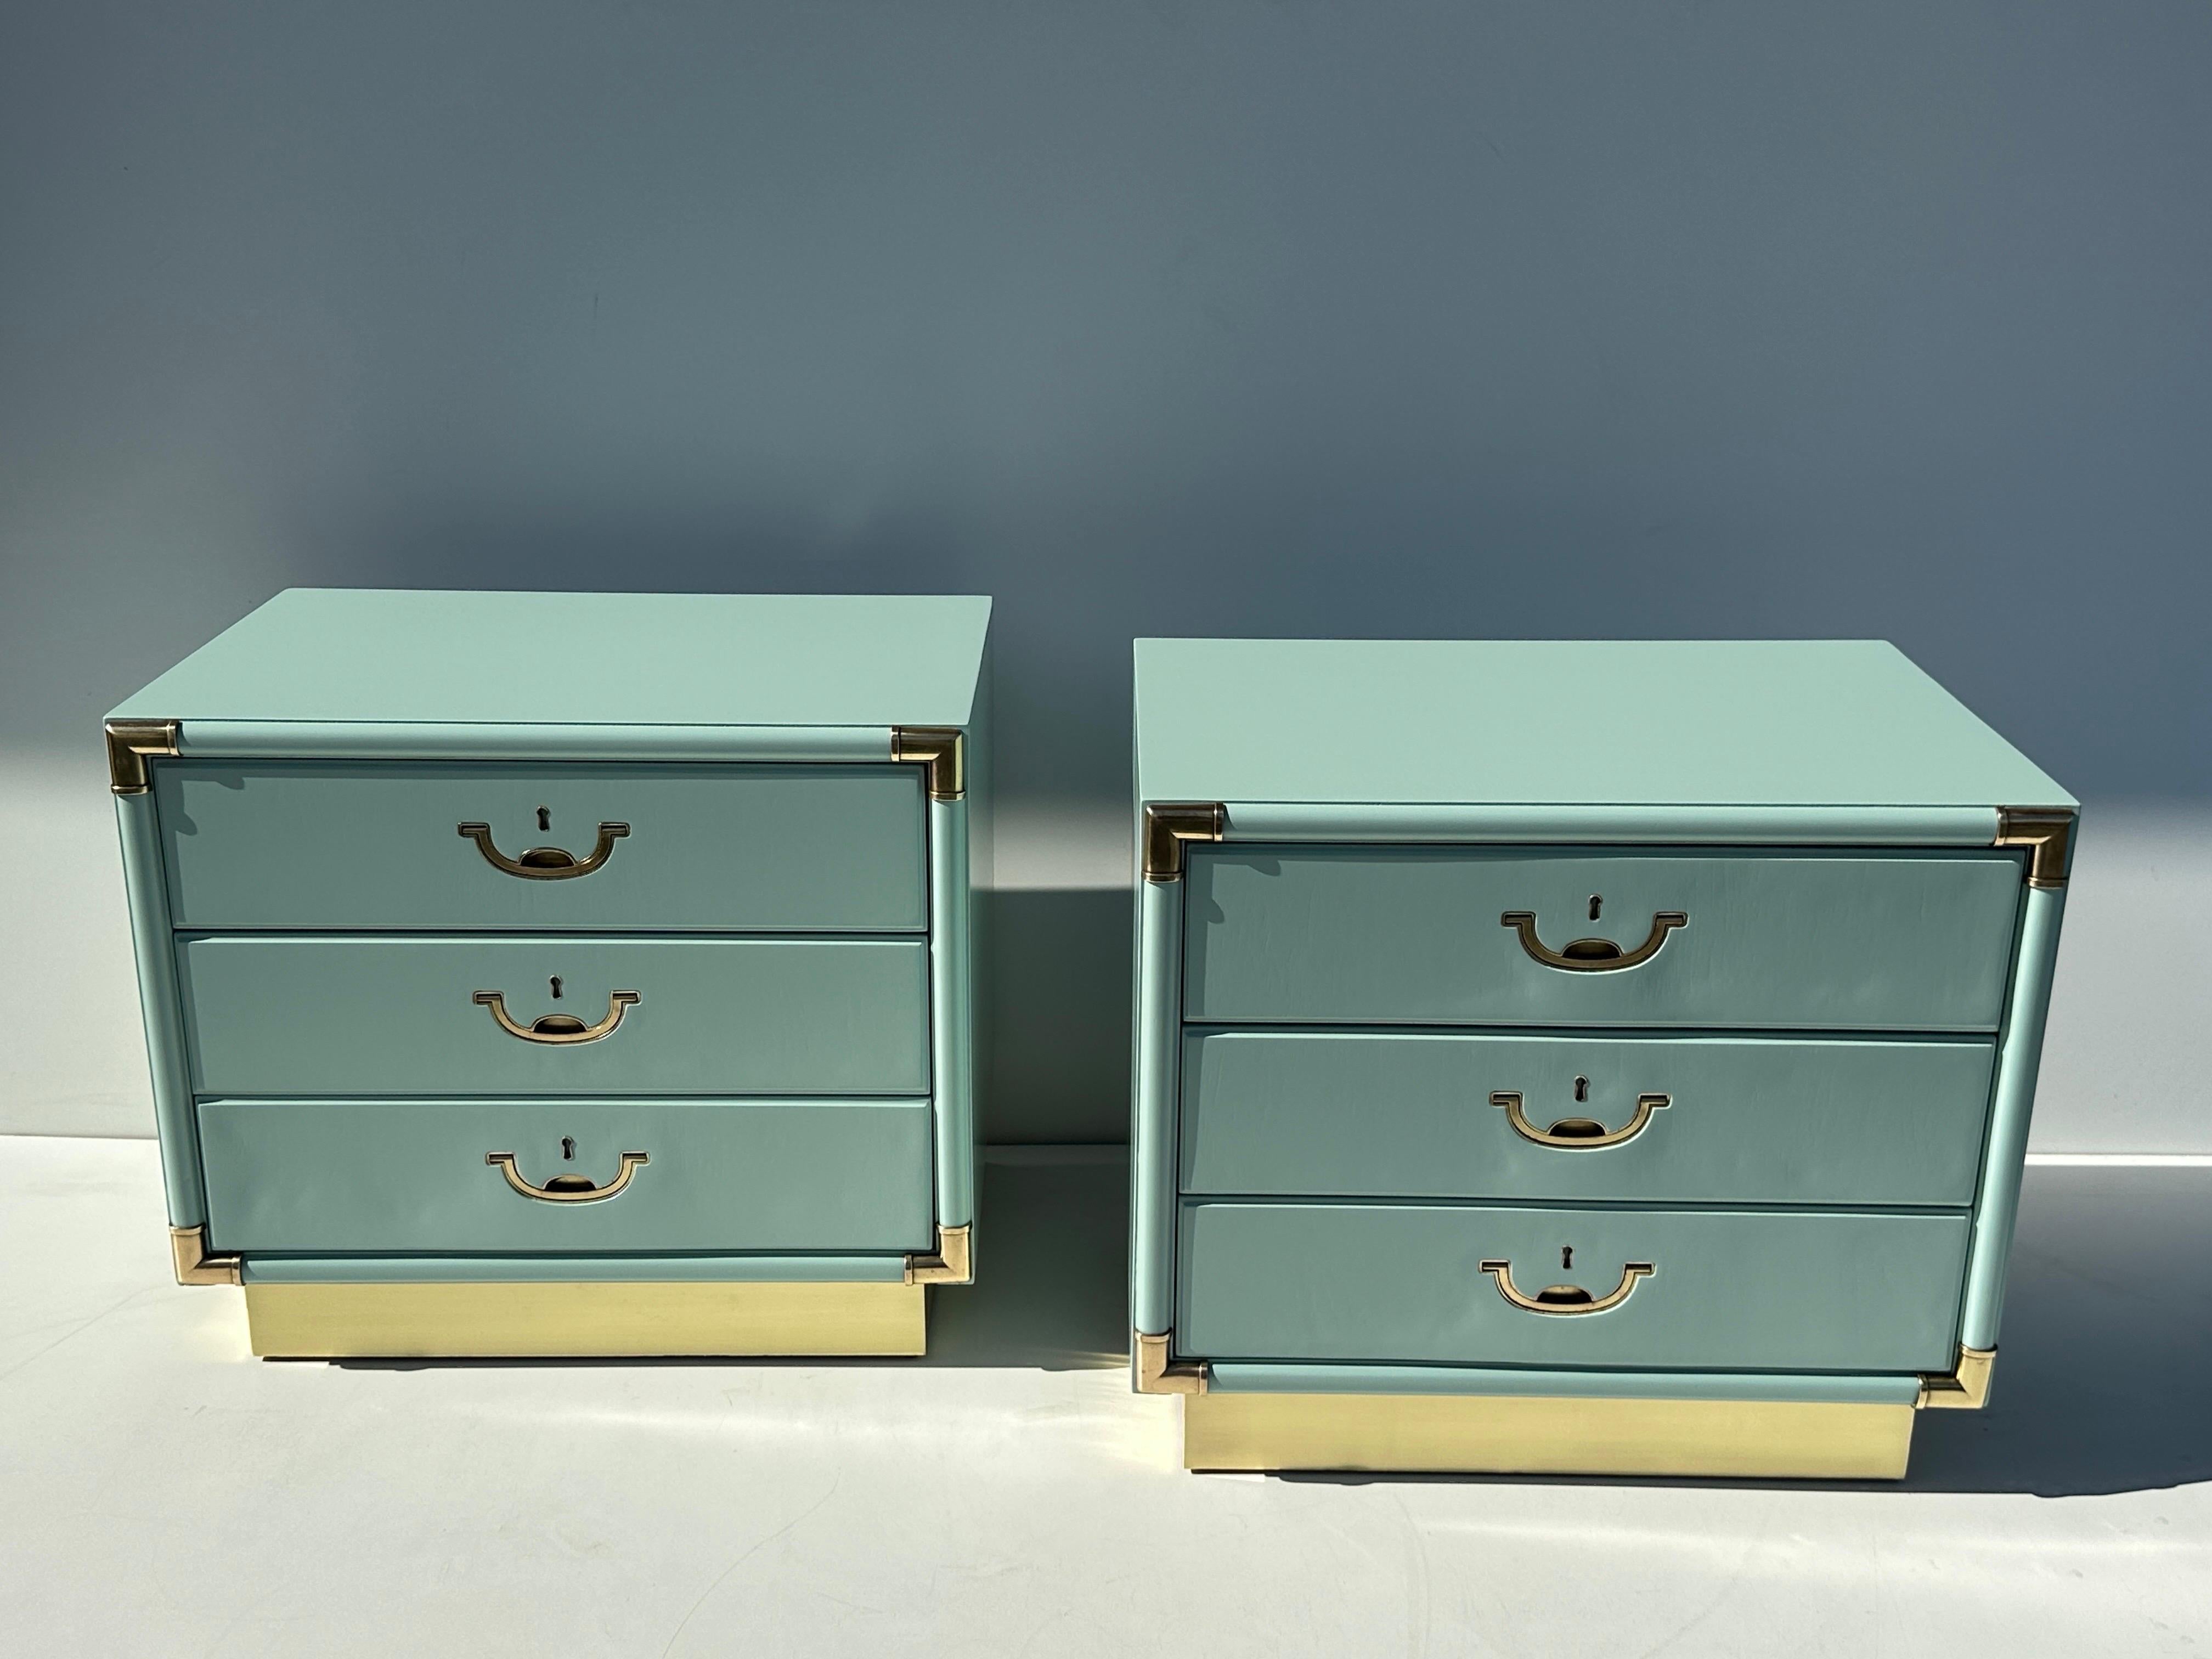 Pair of sea foam green / turquoise three drawer nightshades with brass accents and base by Drexel.